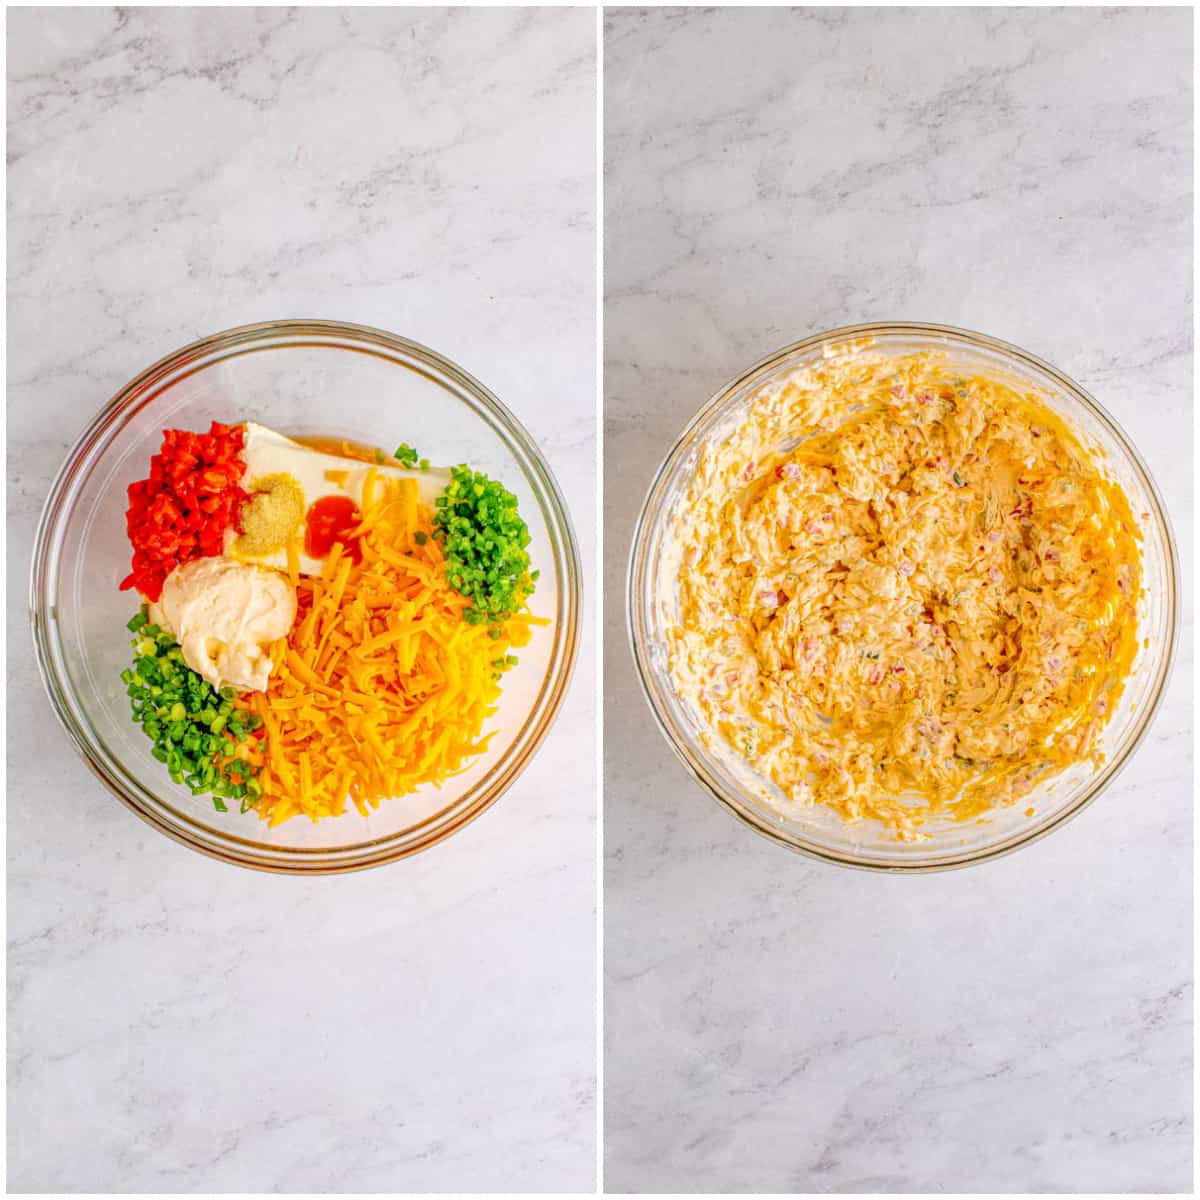 Step by step photos on how to make Pimento Cheese.